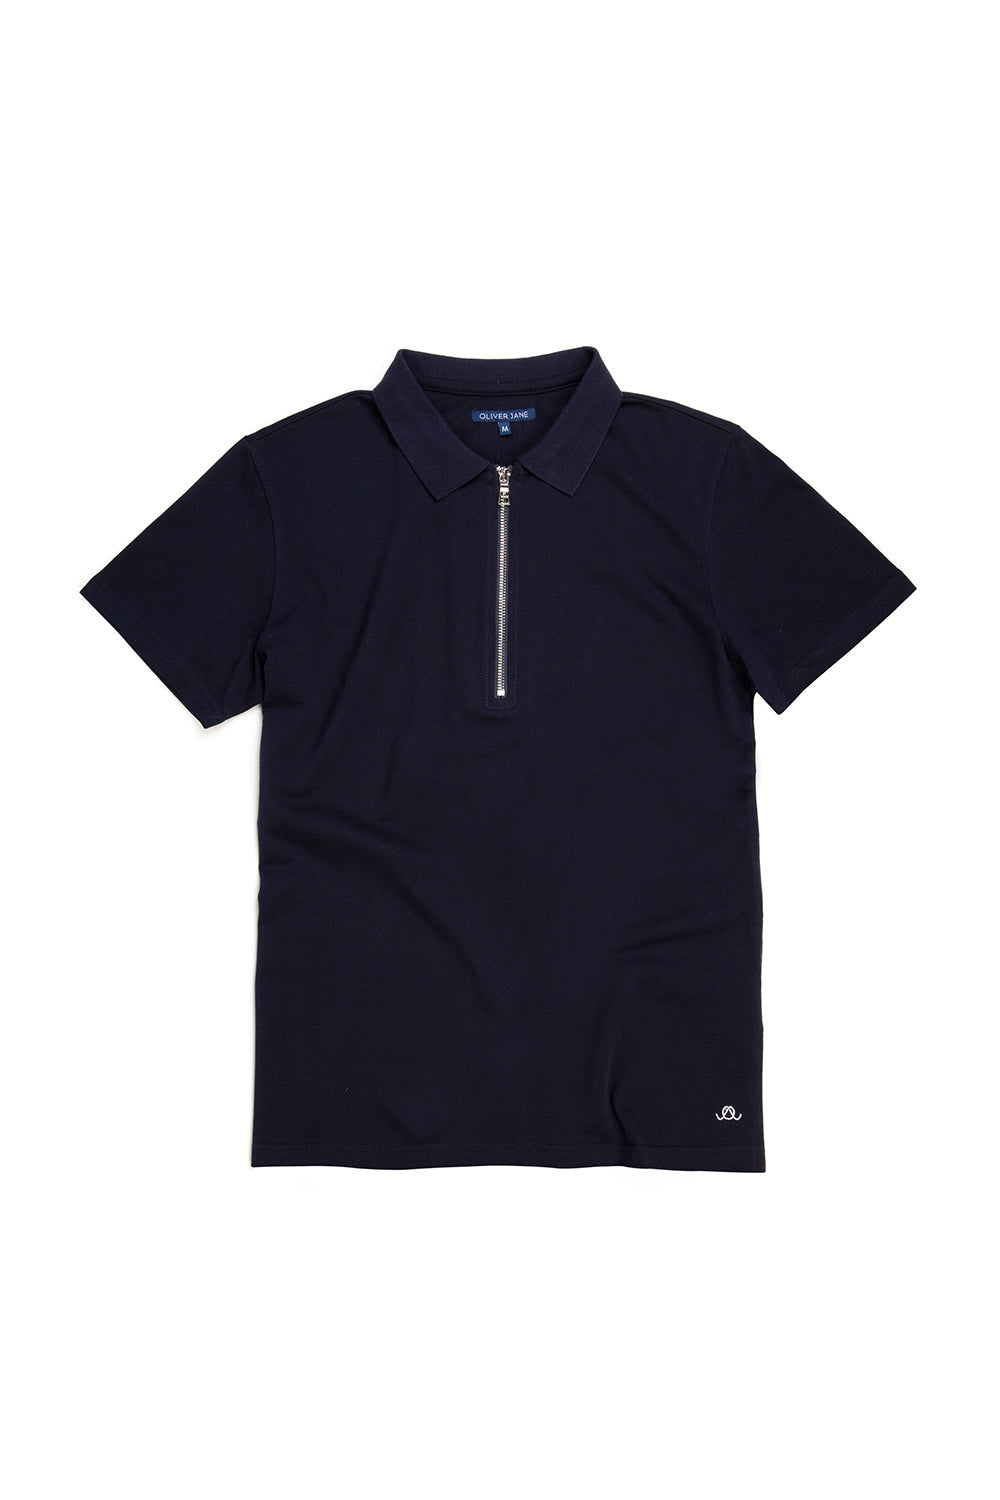 The Navy Miami Polo Classic Fit